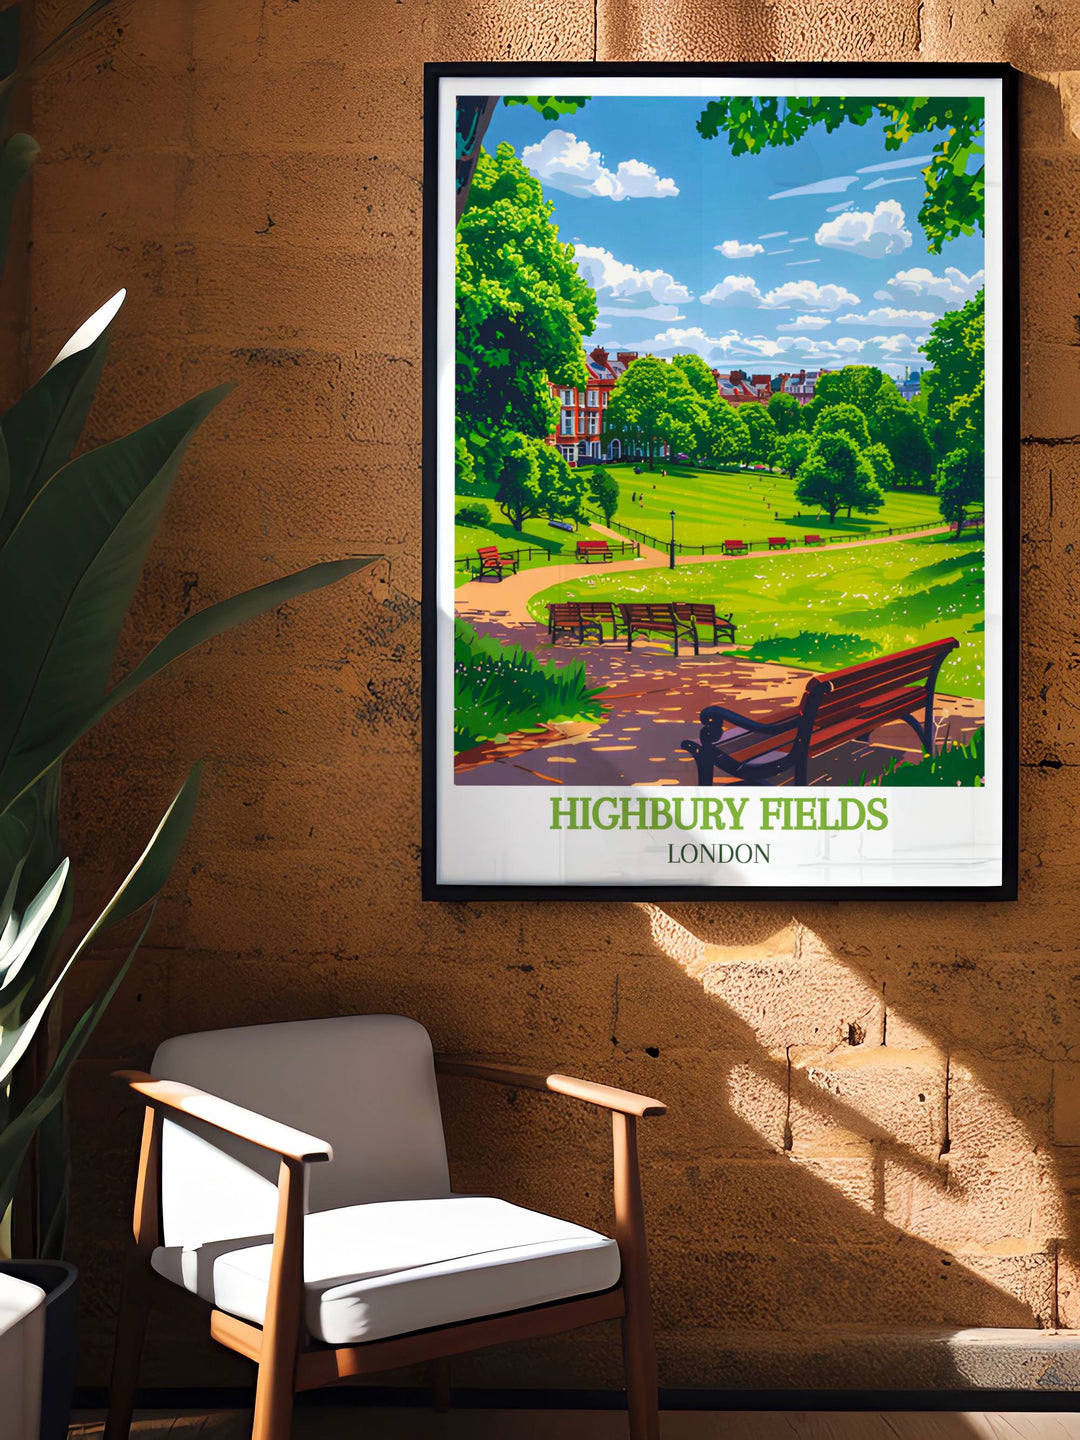 London park poster of Highbury Fields focusing on the detailed green spaces and recreational areas